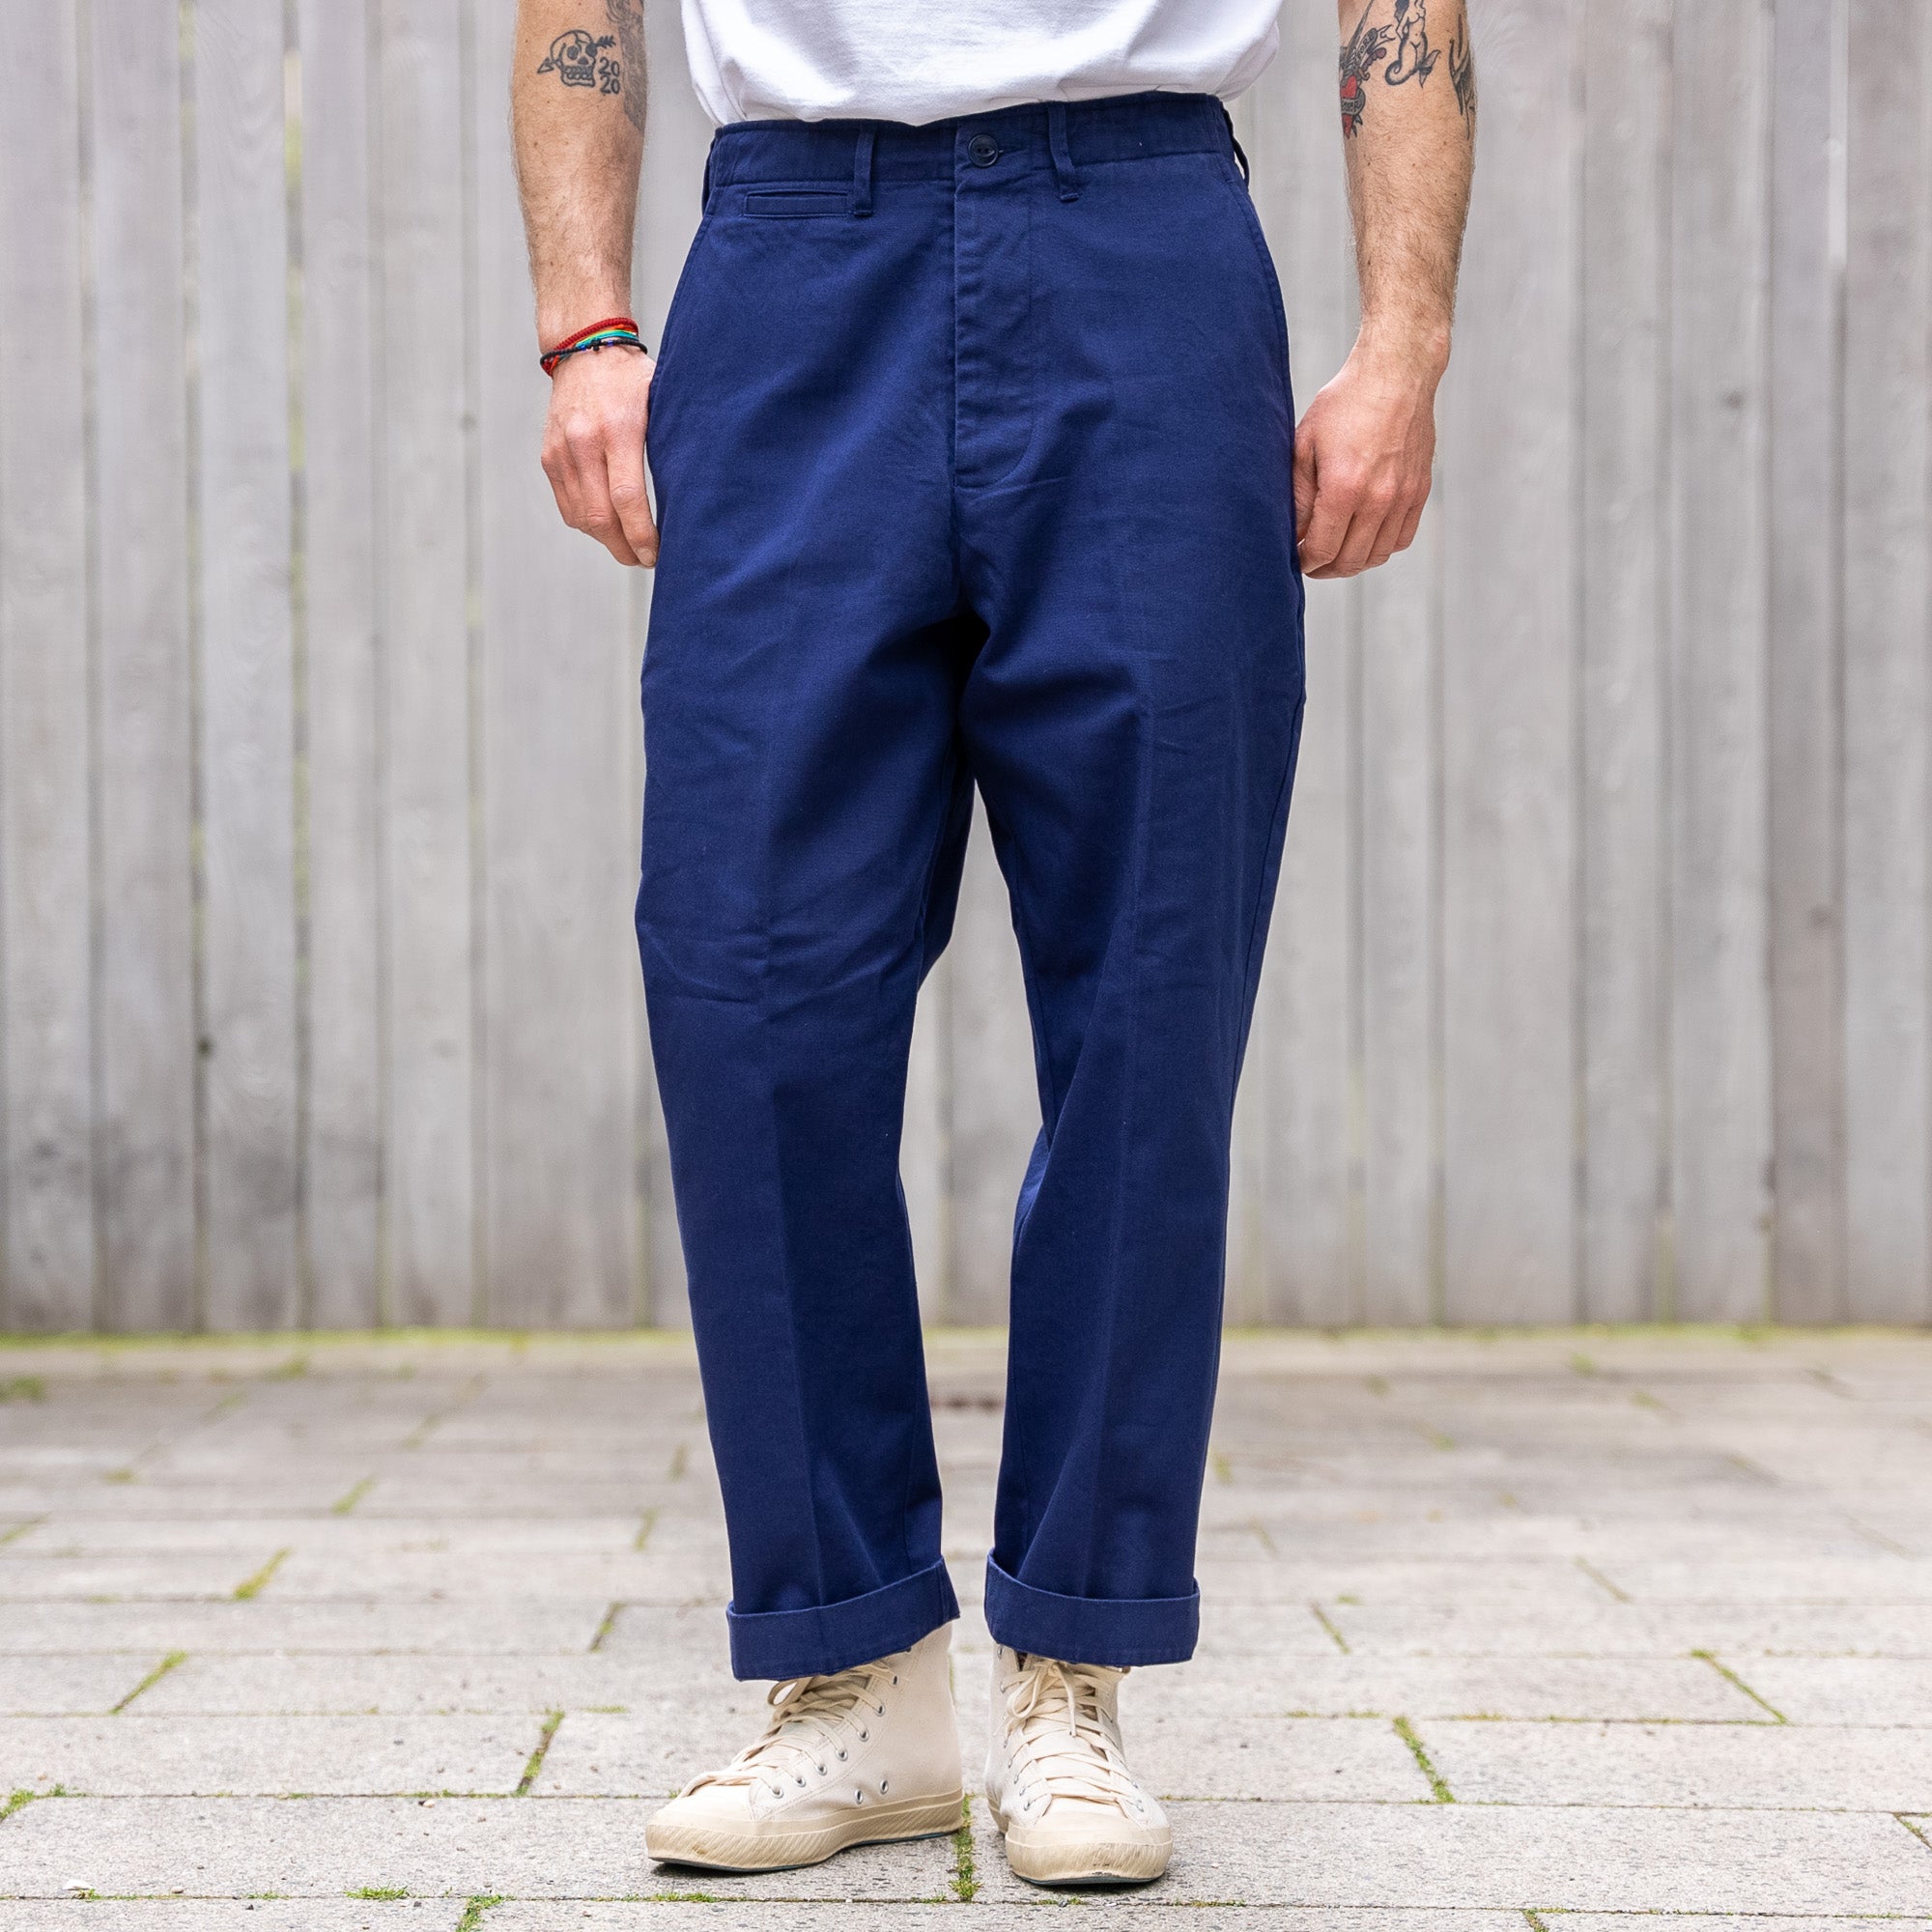 Merz b Schwanen Tapered Chino Twill Pleat Ink Relaxed – Blue 